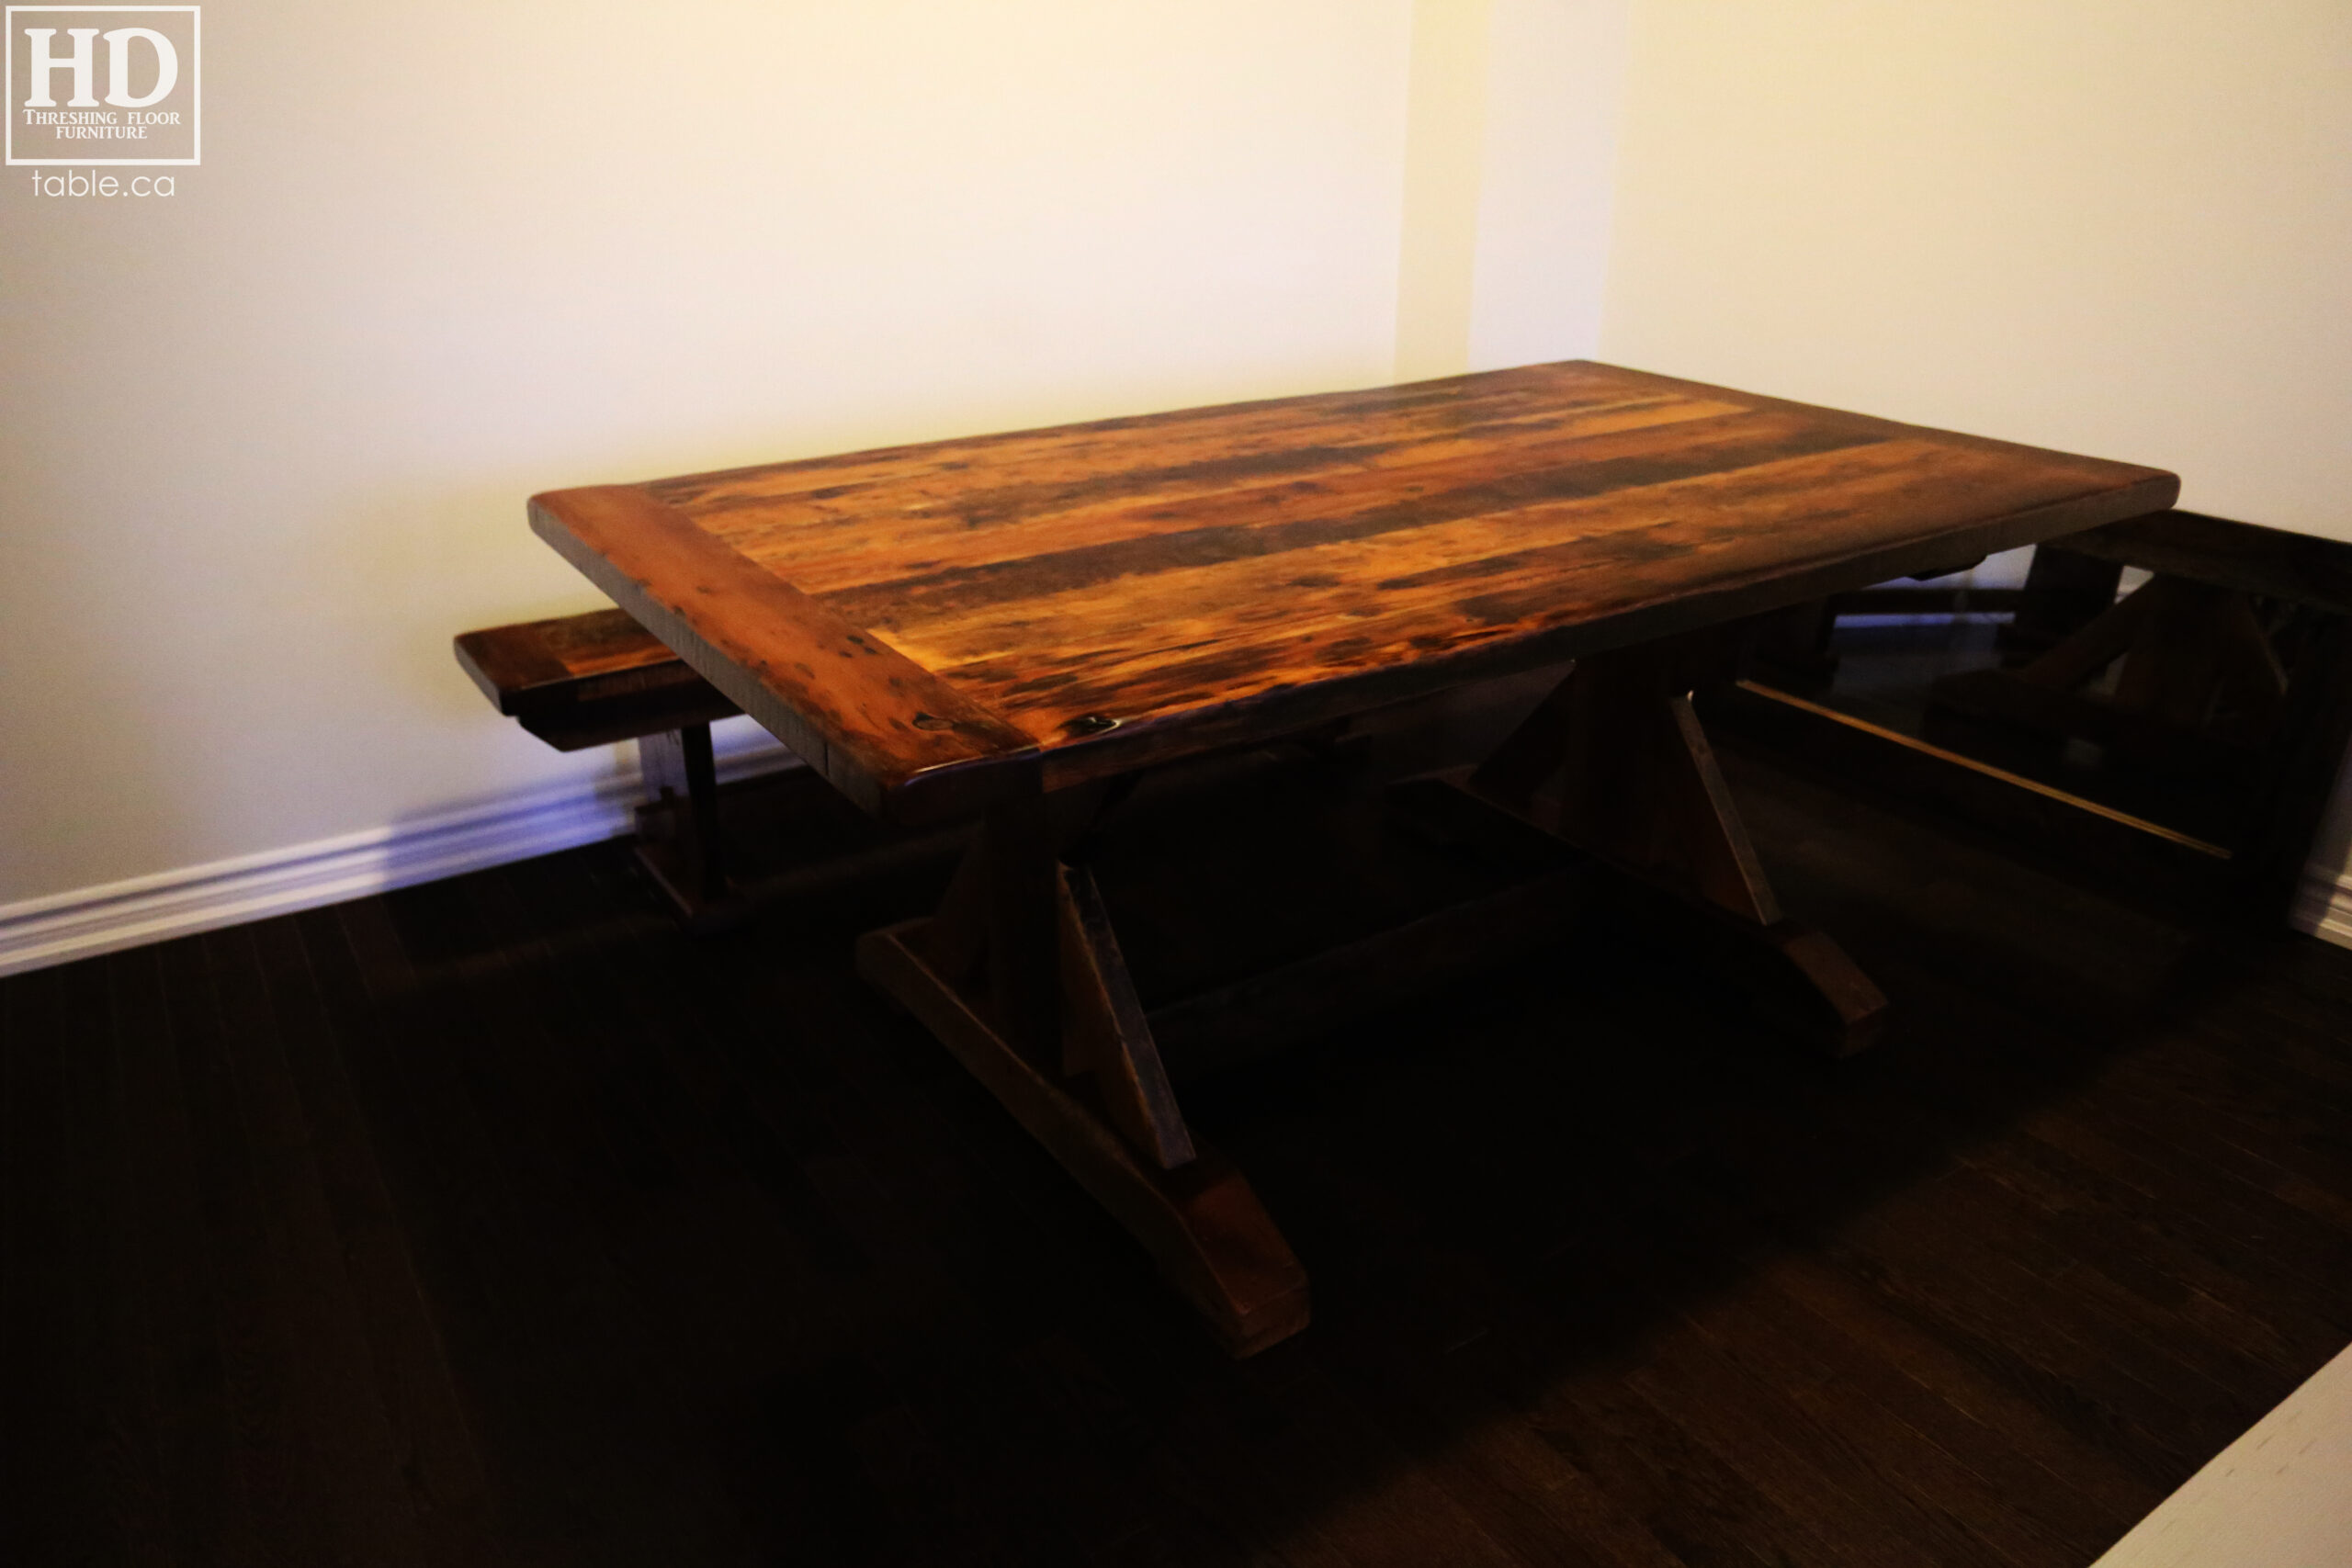 Epoxy Finish on a Reclaimed Wood Table by HD Threshing Floor Furniture / www.table.ca